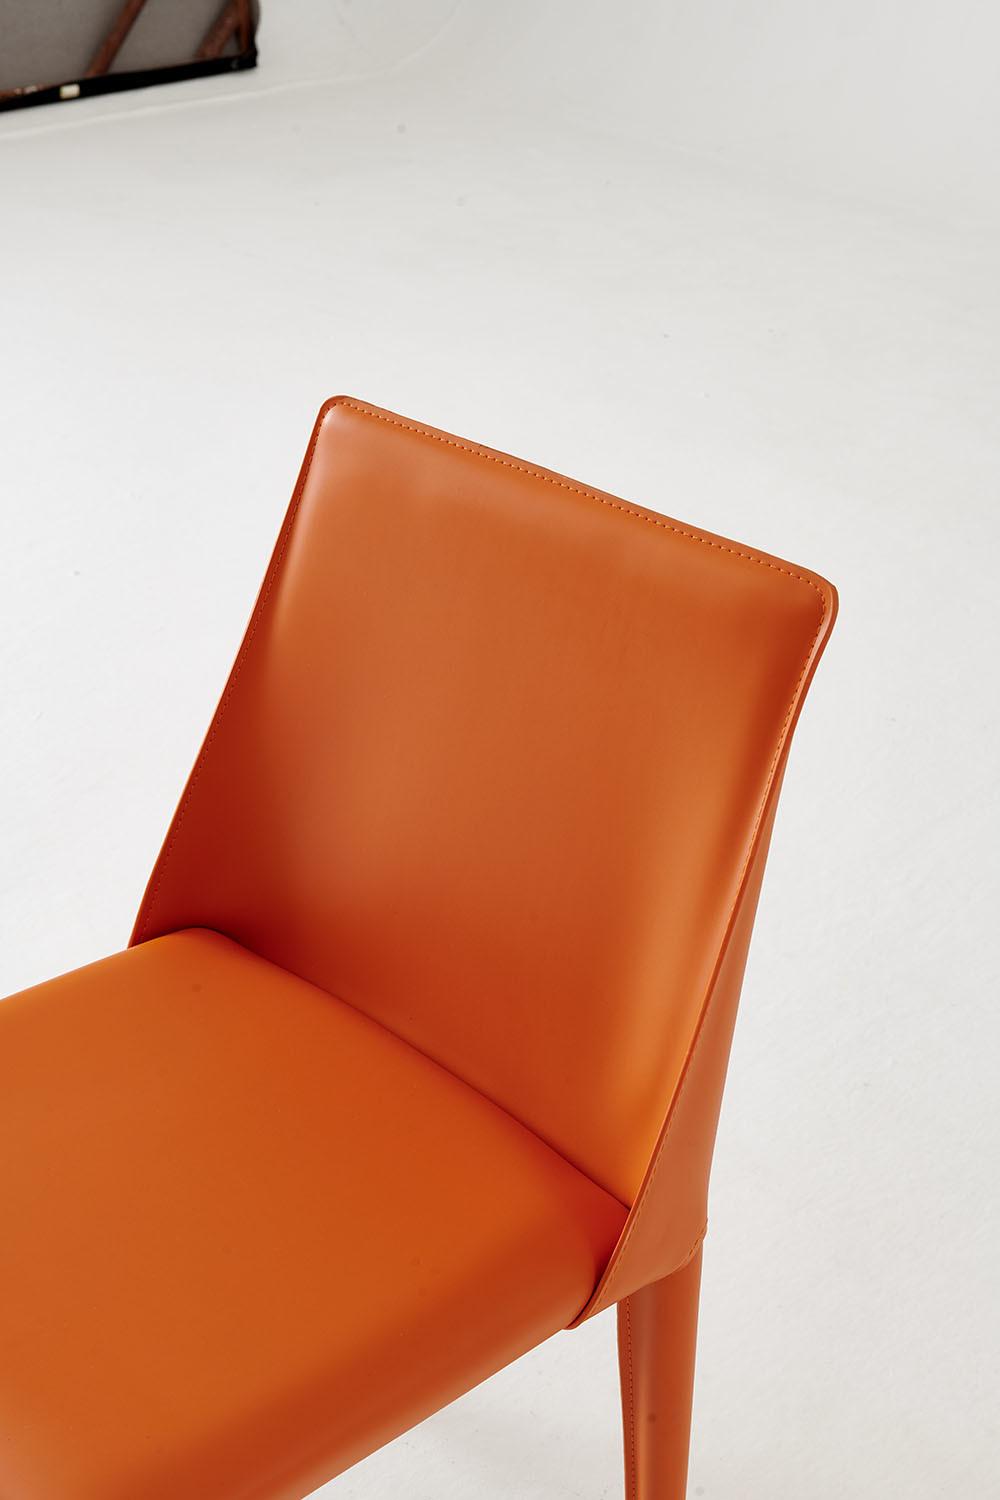 Hot Selling New Design Furniture Orange Office Chair